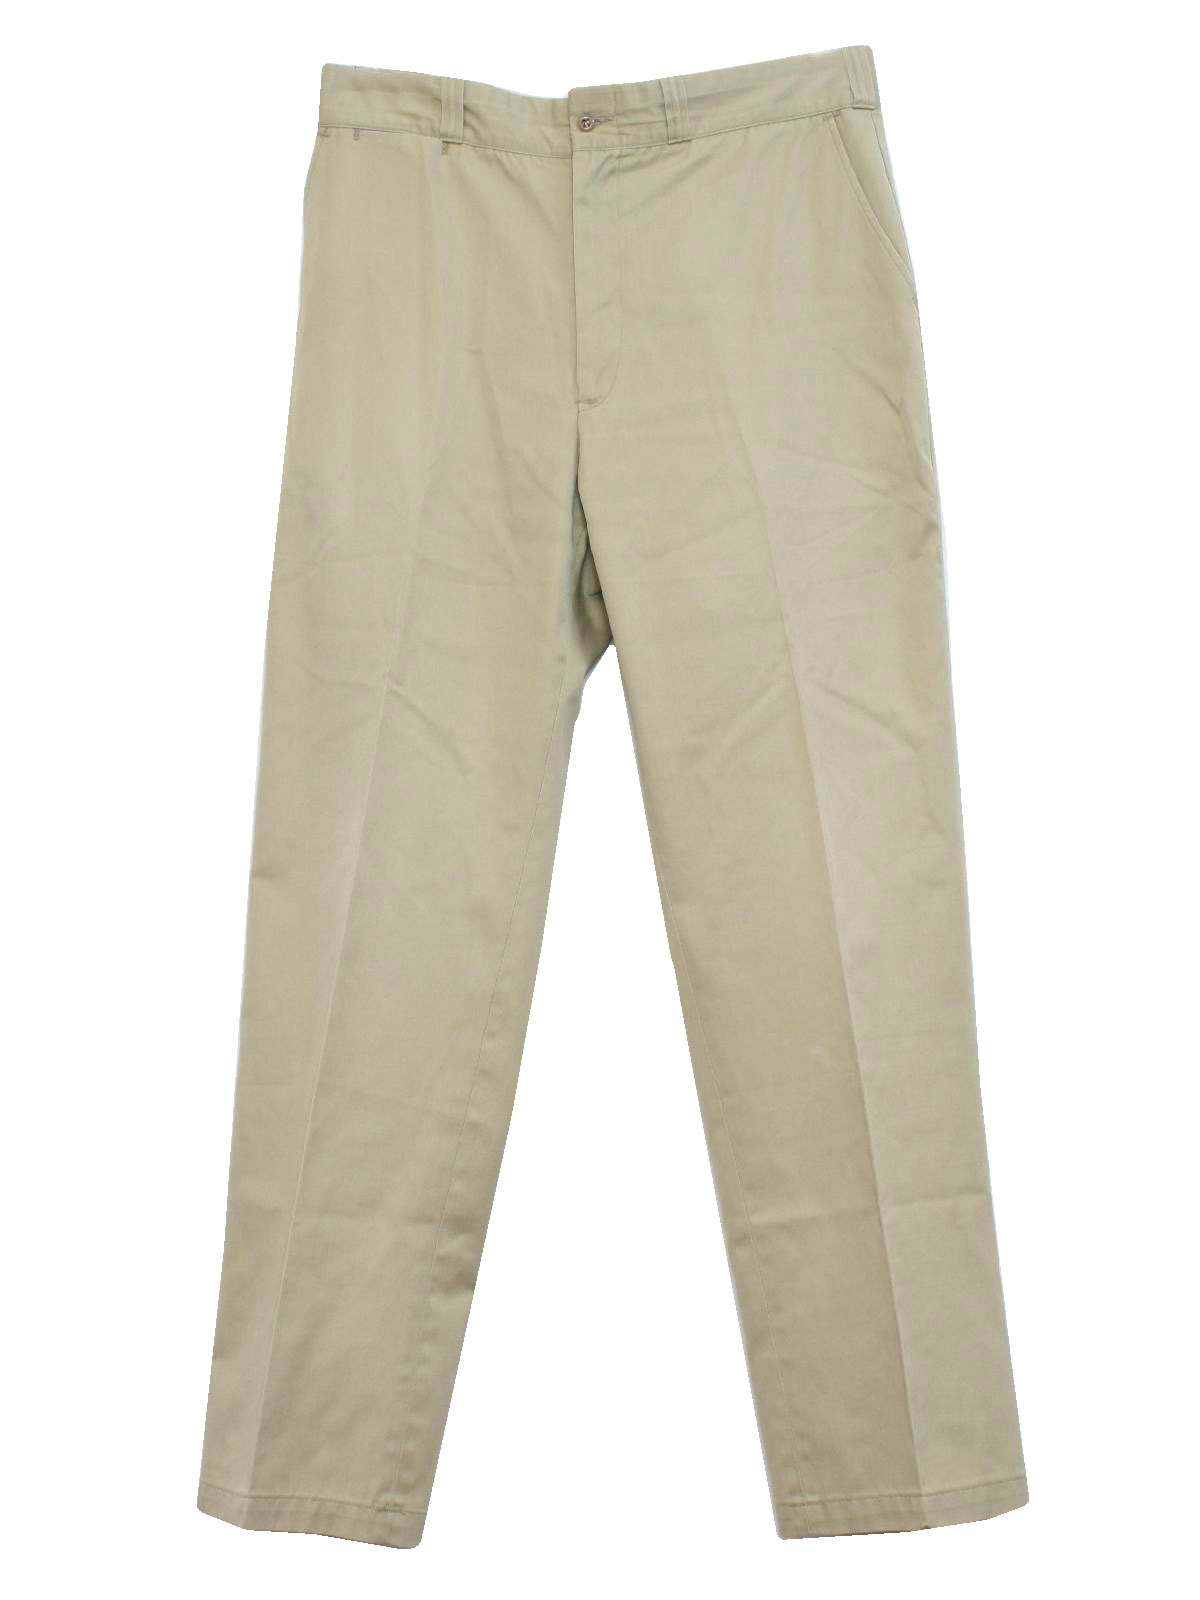 Vintage 60s Pants: 60s -Montgomery Ward- Mens tan cotton polyester ...